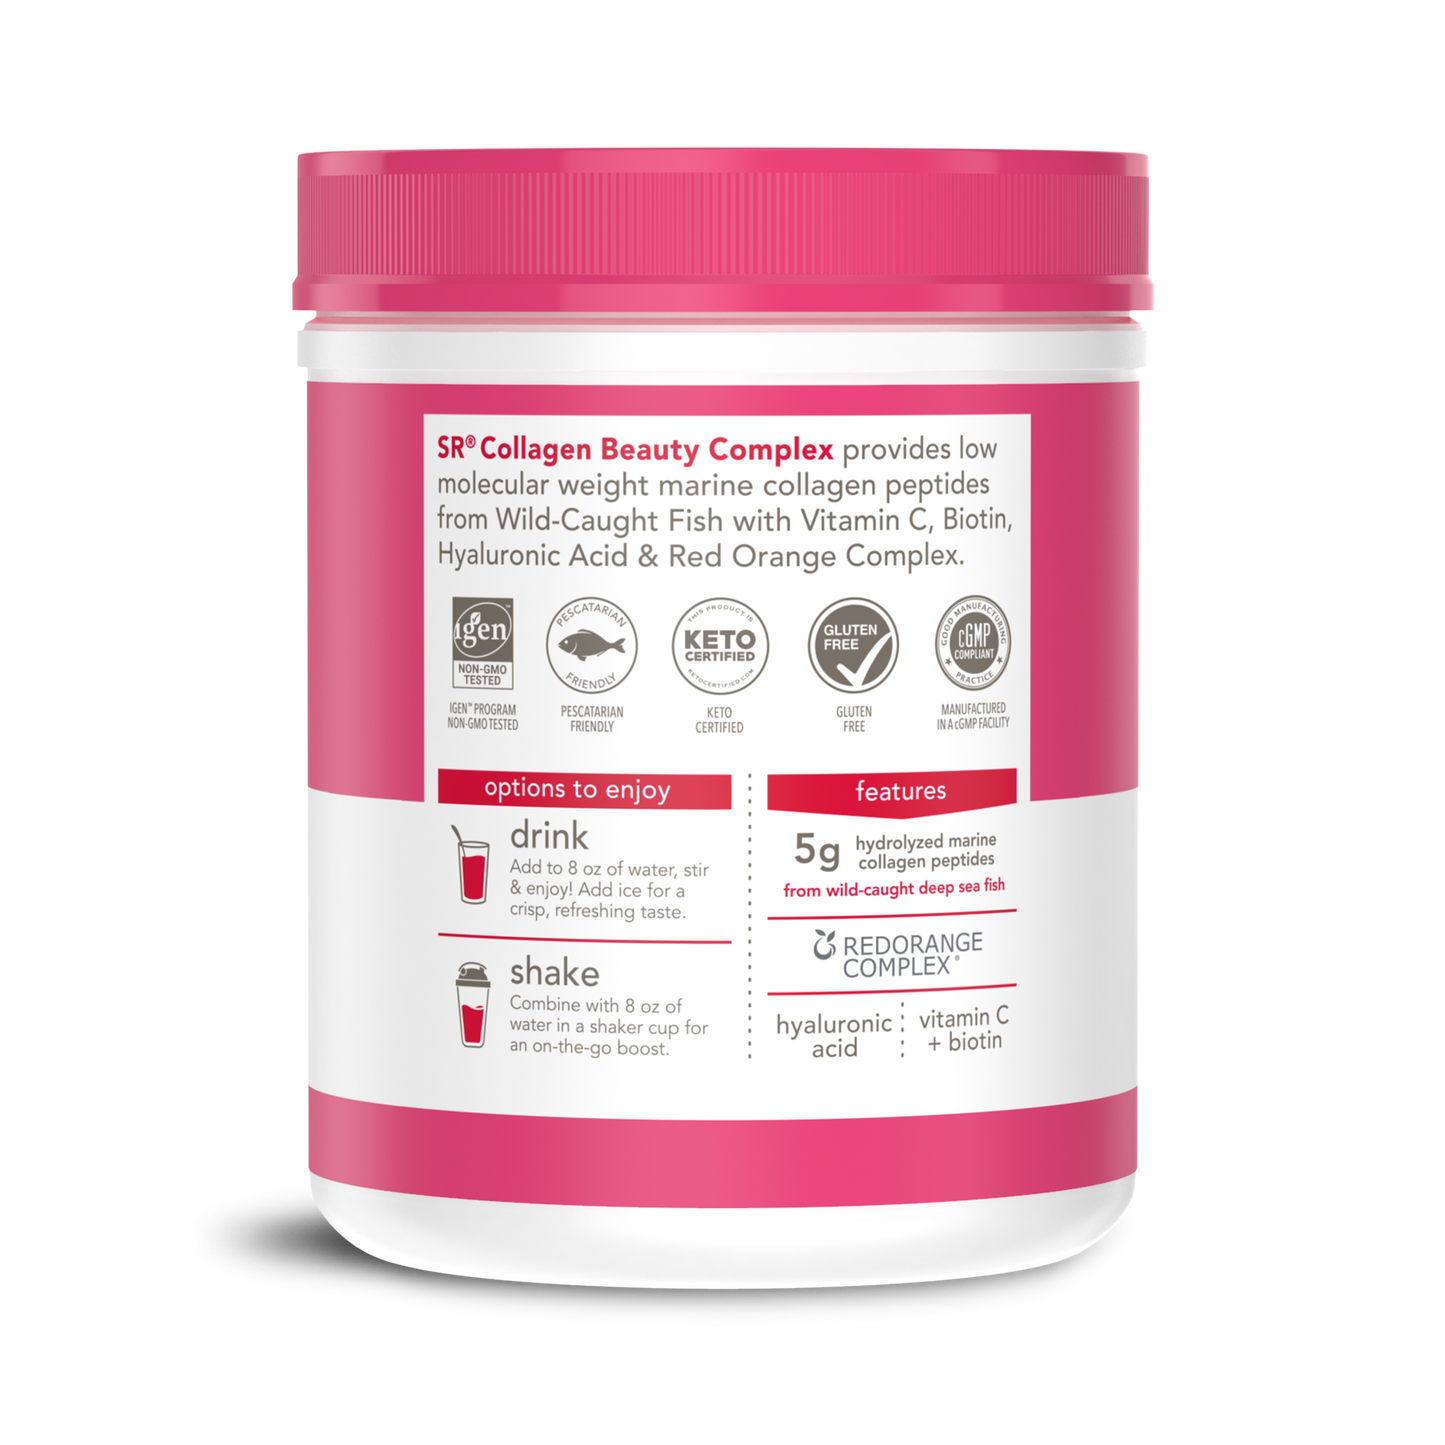 a pink and white container of Sports Research Marine Collagen Complex with Hyaluronic Acid, with white text and red label.